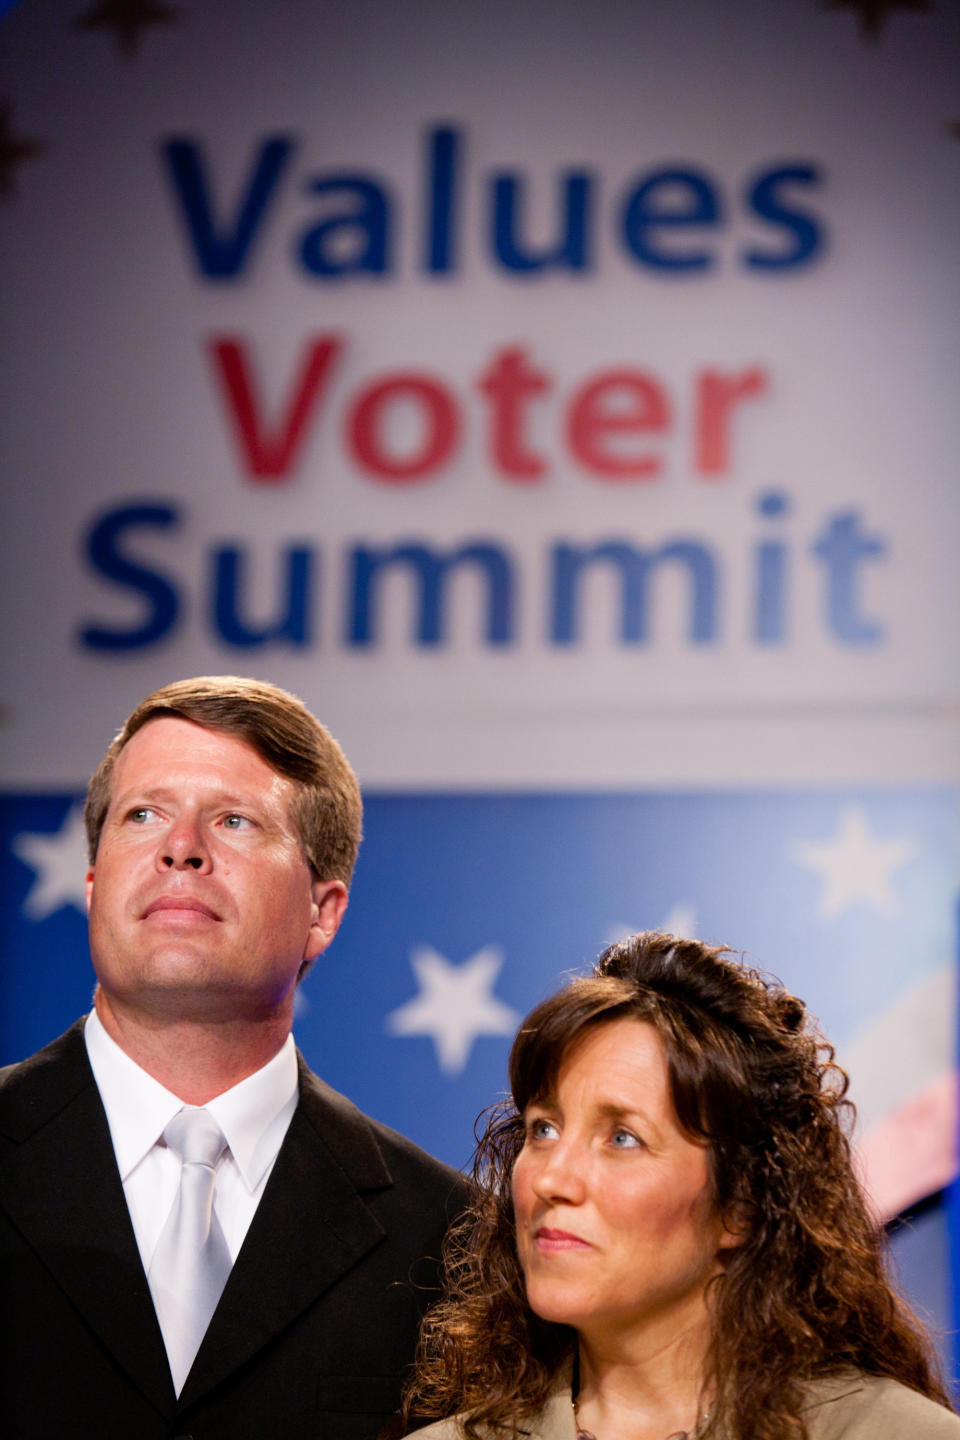 WASHINGTON - SEPTEMBER 17: Jim Bob Duggar (L) and Michelle Duggar of The Learning Channel TV show '19 Kids and Counting' speak at the Values Voter Summit on September 17, 2010 in Washington, DC. The annual summit drew nearly two thousand people to advocate for conservative causes. (Photo by Brendan Hoffman/Getty Images)